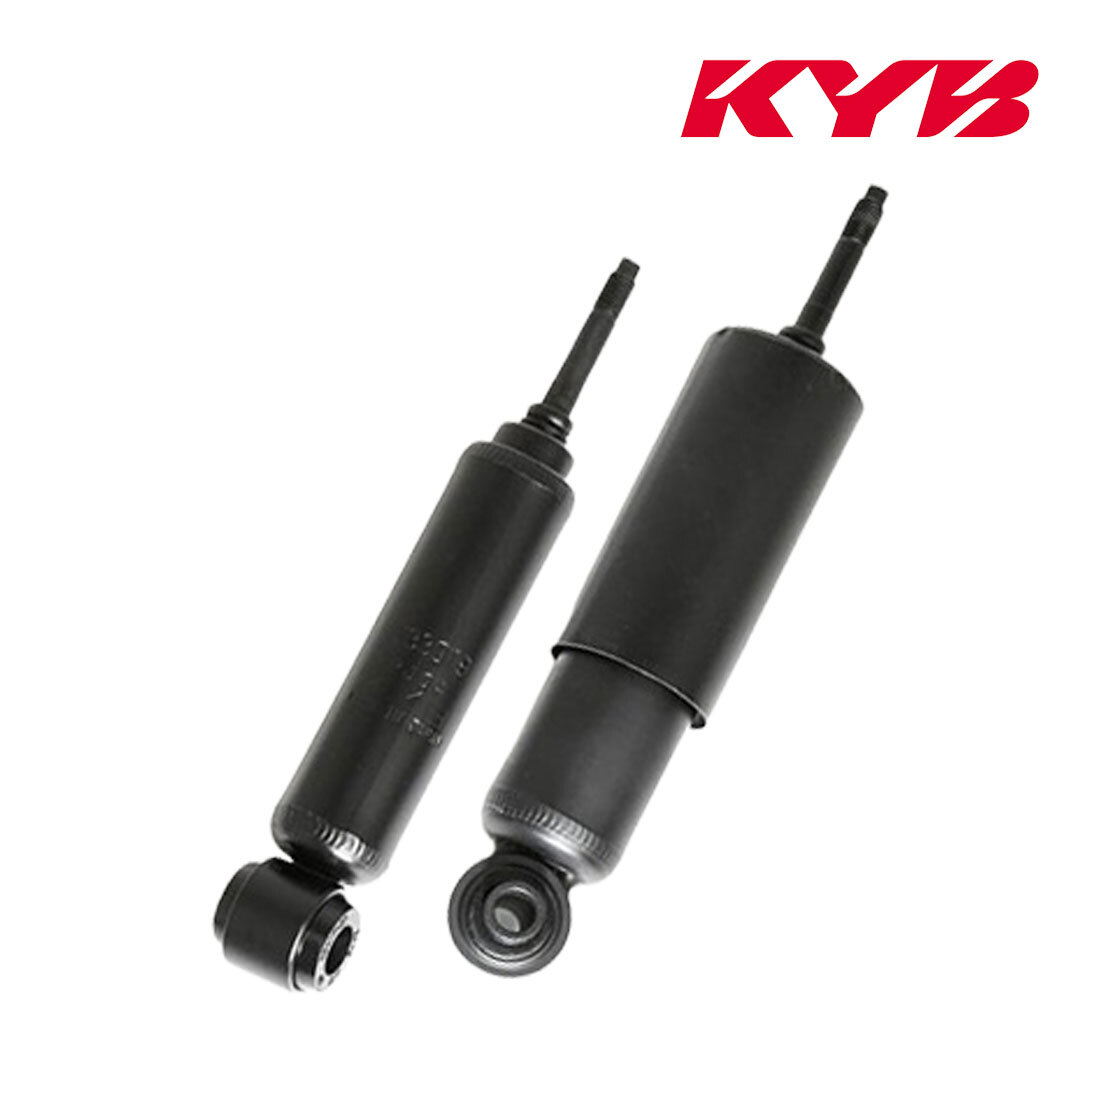 KYB KYB for repair shock absorber rear left right 2 pcs set Elf NKR71ED product number KSA1371/KSA1371 gome private person shipping possible 